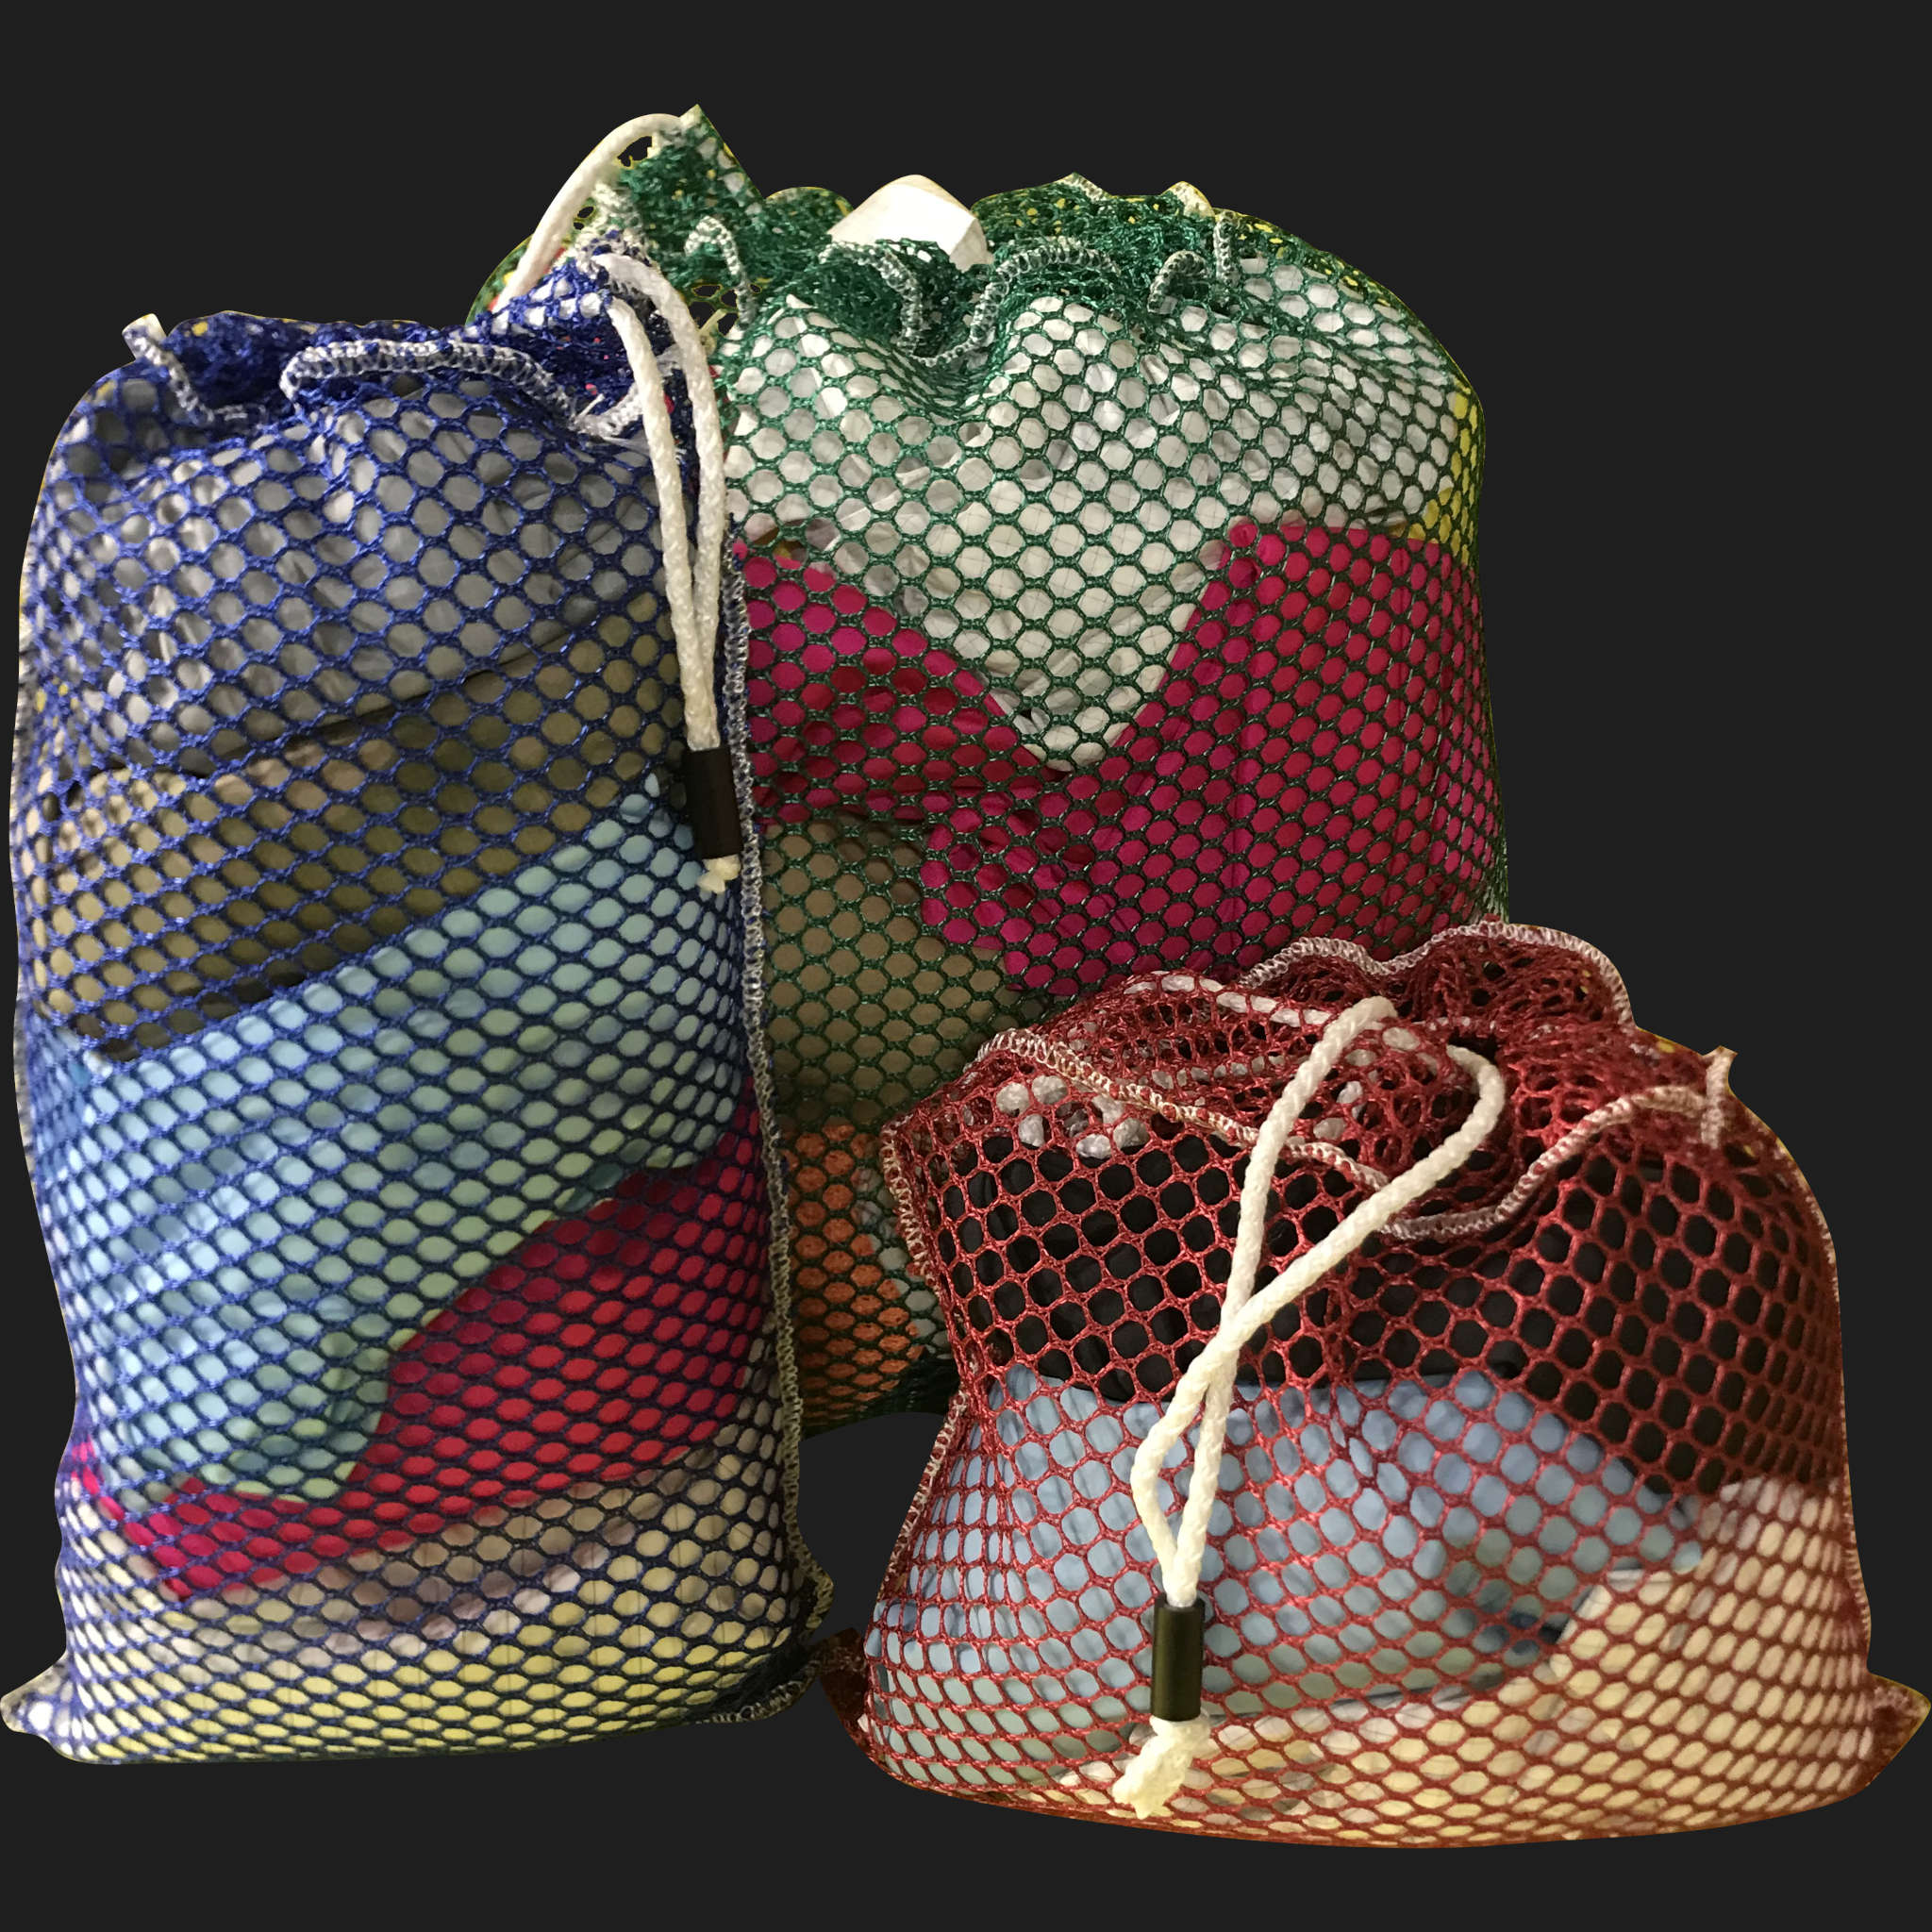 38" x 42" Customized Mesh-Net-Laundry Bags Heavy Duty with Cord and barrellock closure